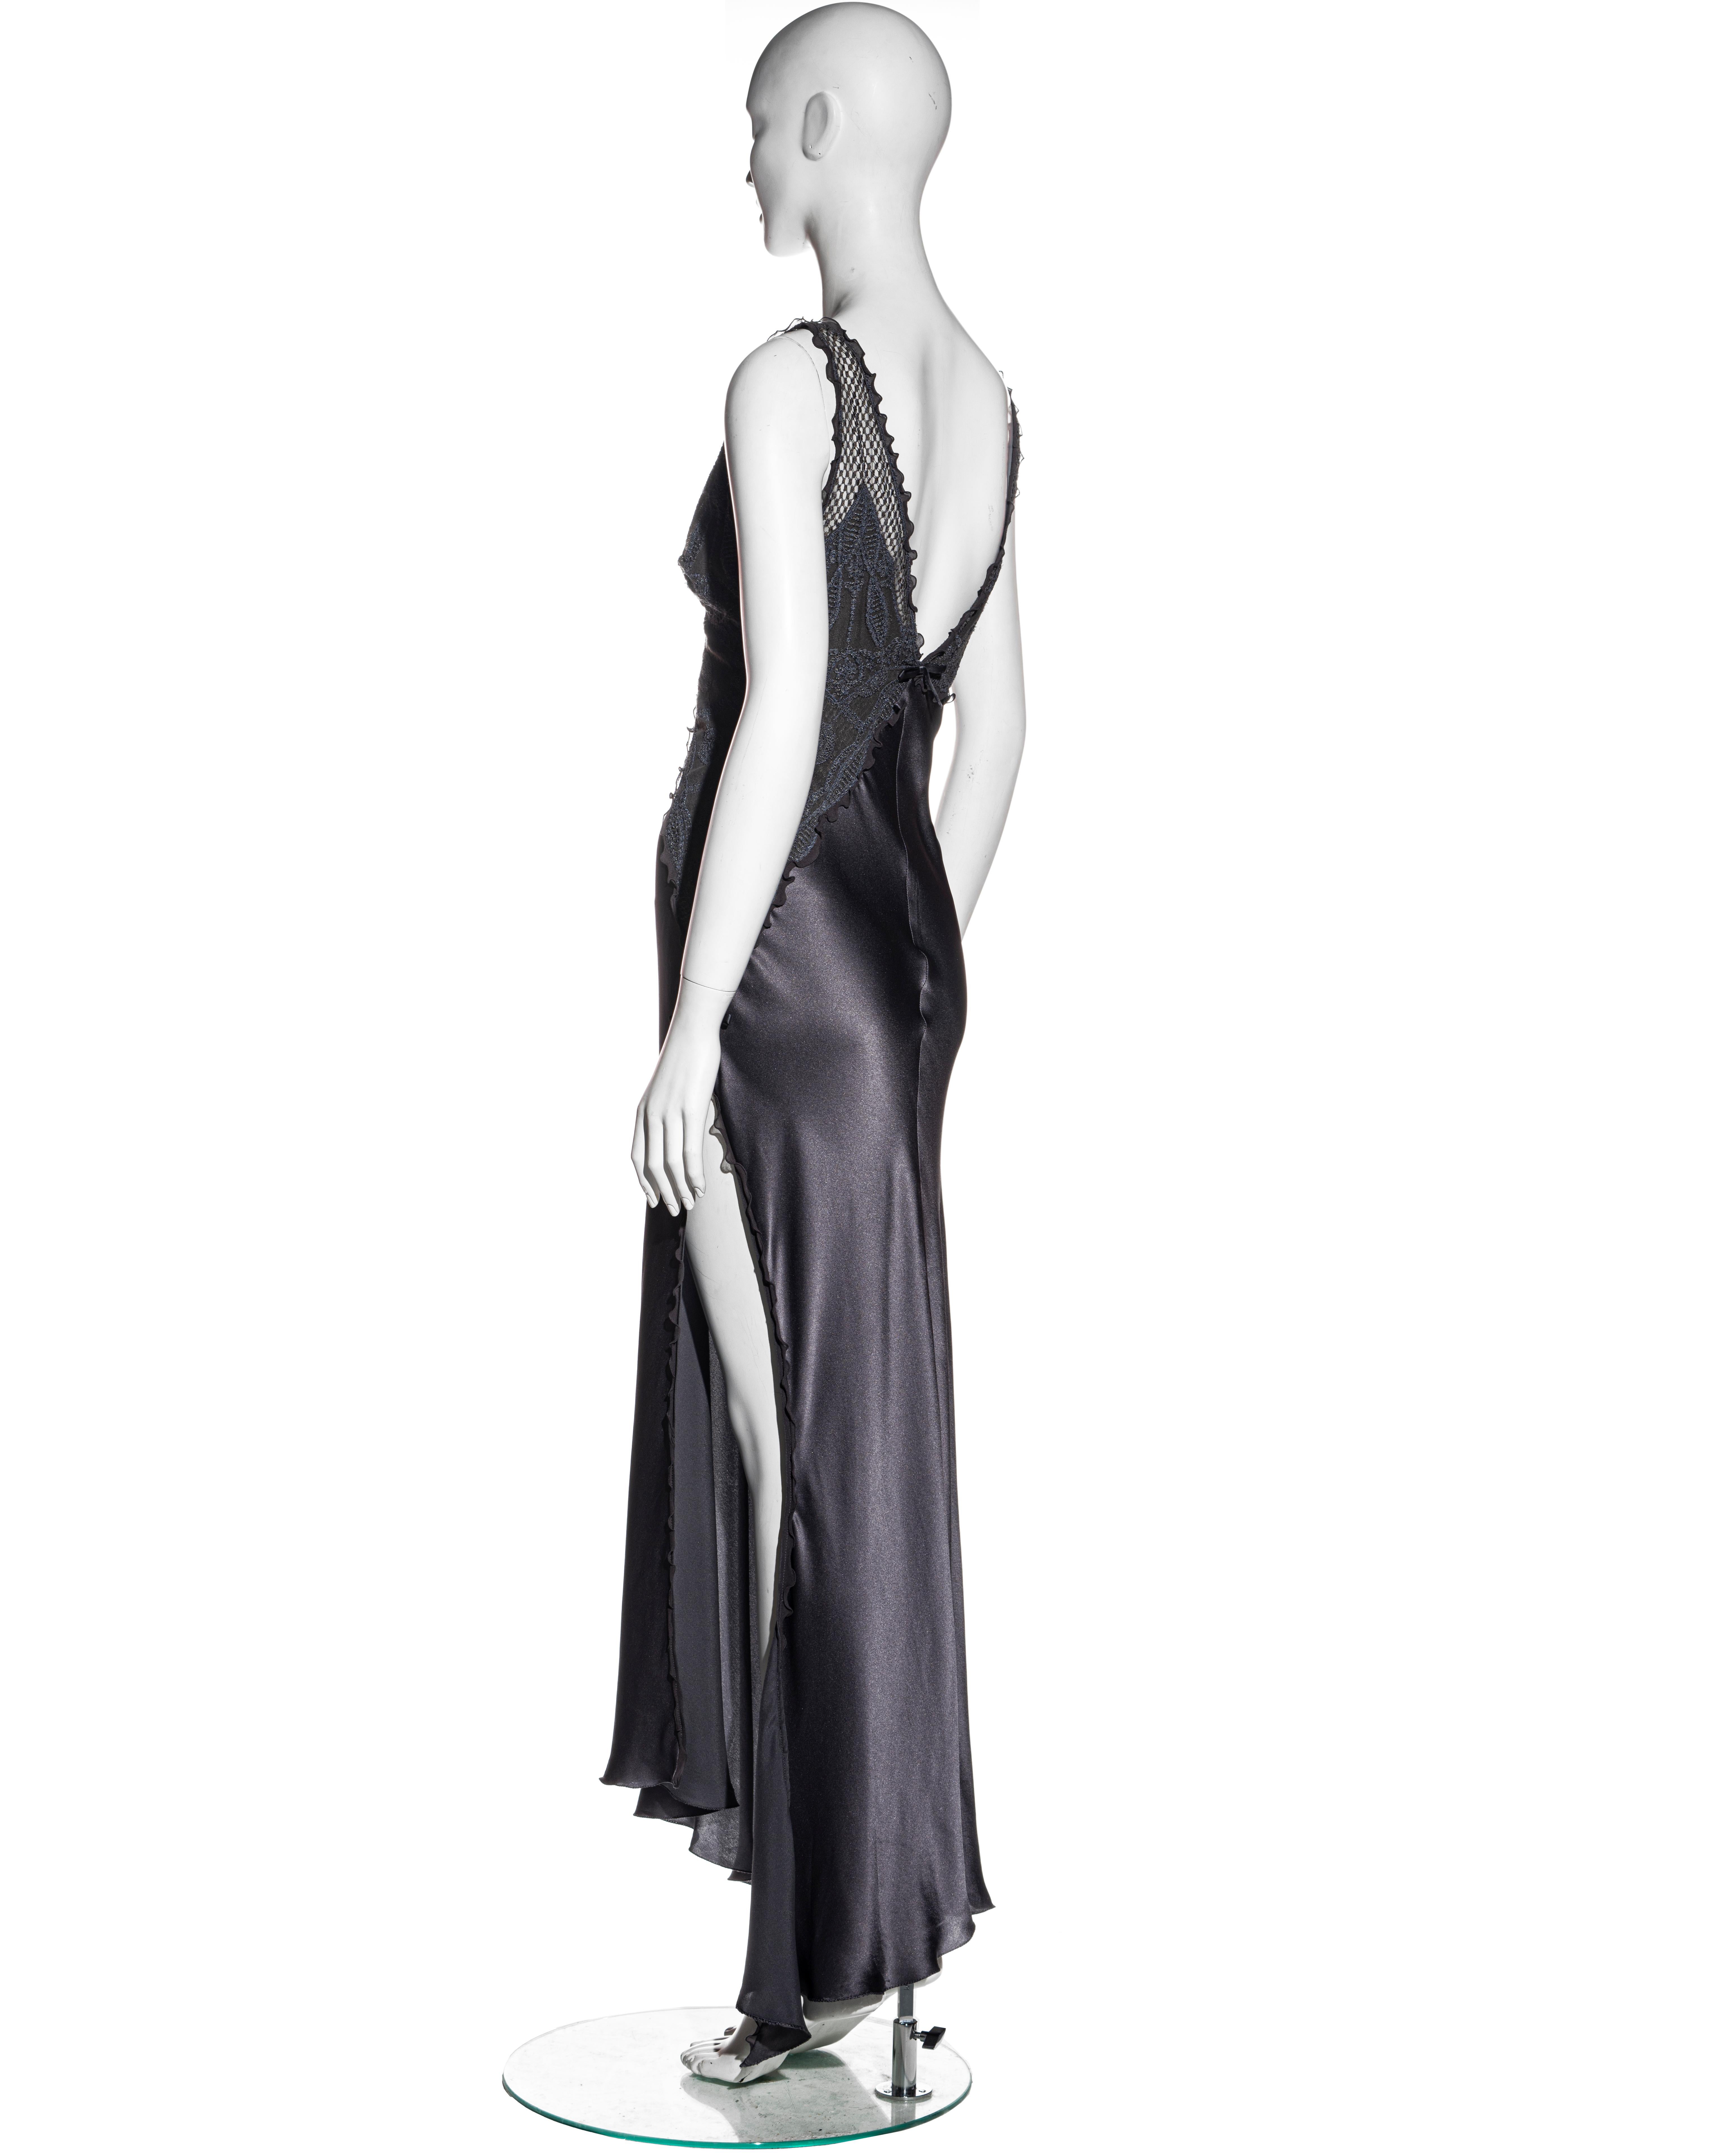 Black Gianni Versace grey silk and lace evening dress with high leg slit, ss 1997